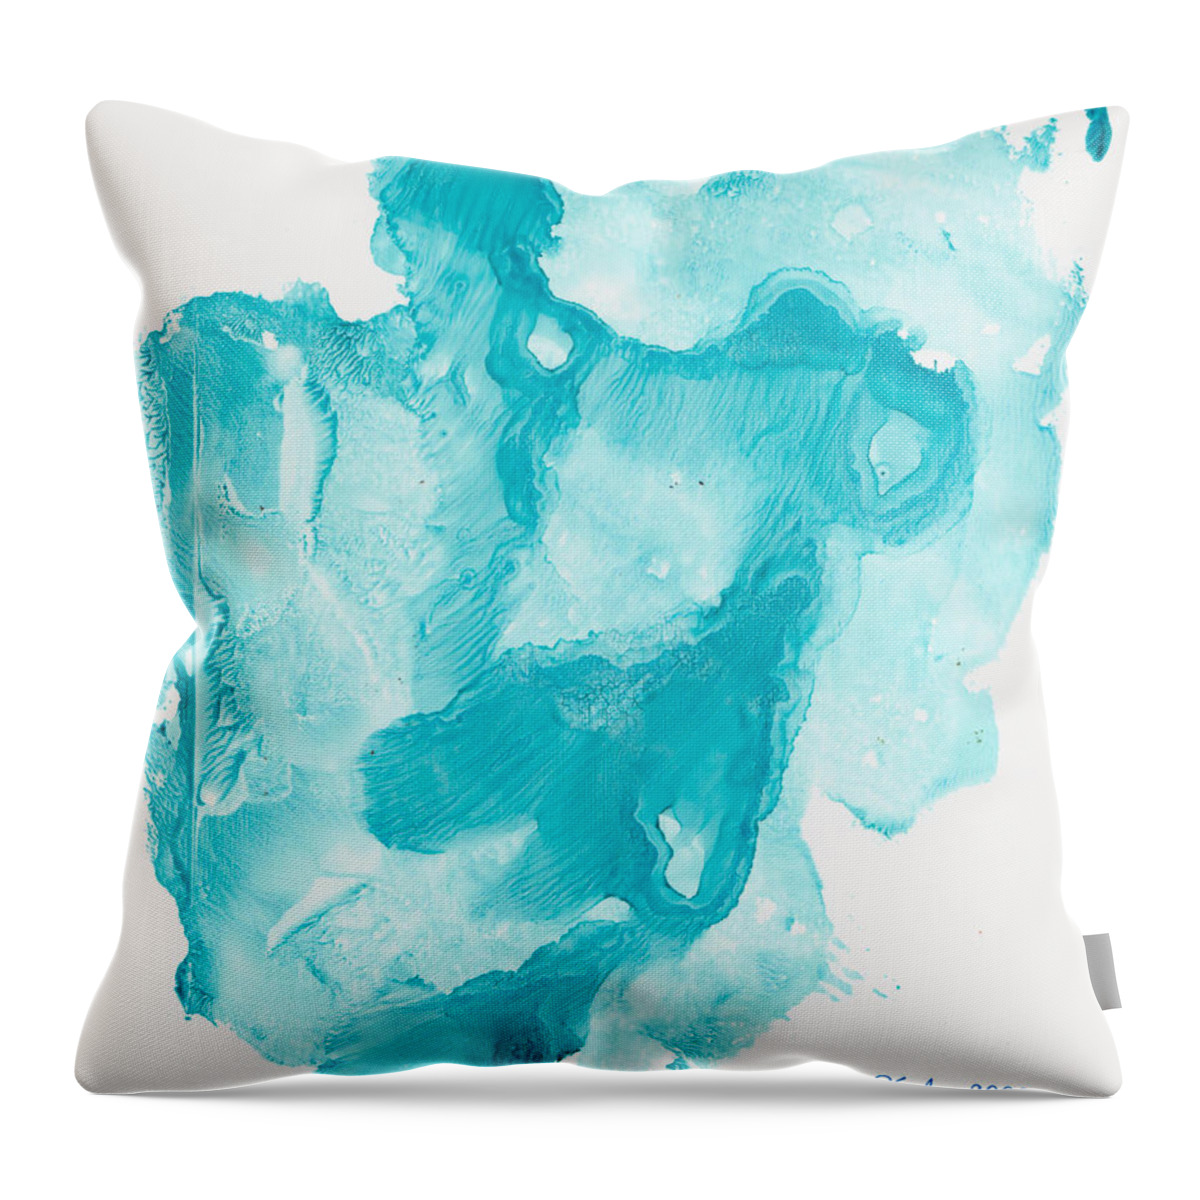 Angel Throw Pillow featuring the painting Reflectiing Angels by Susan Kubes